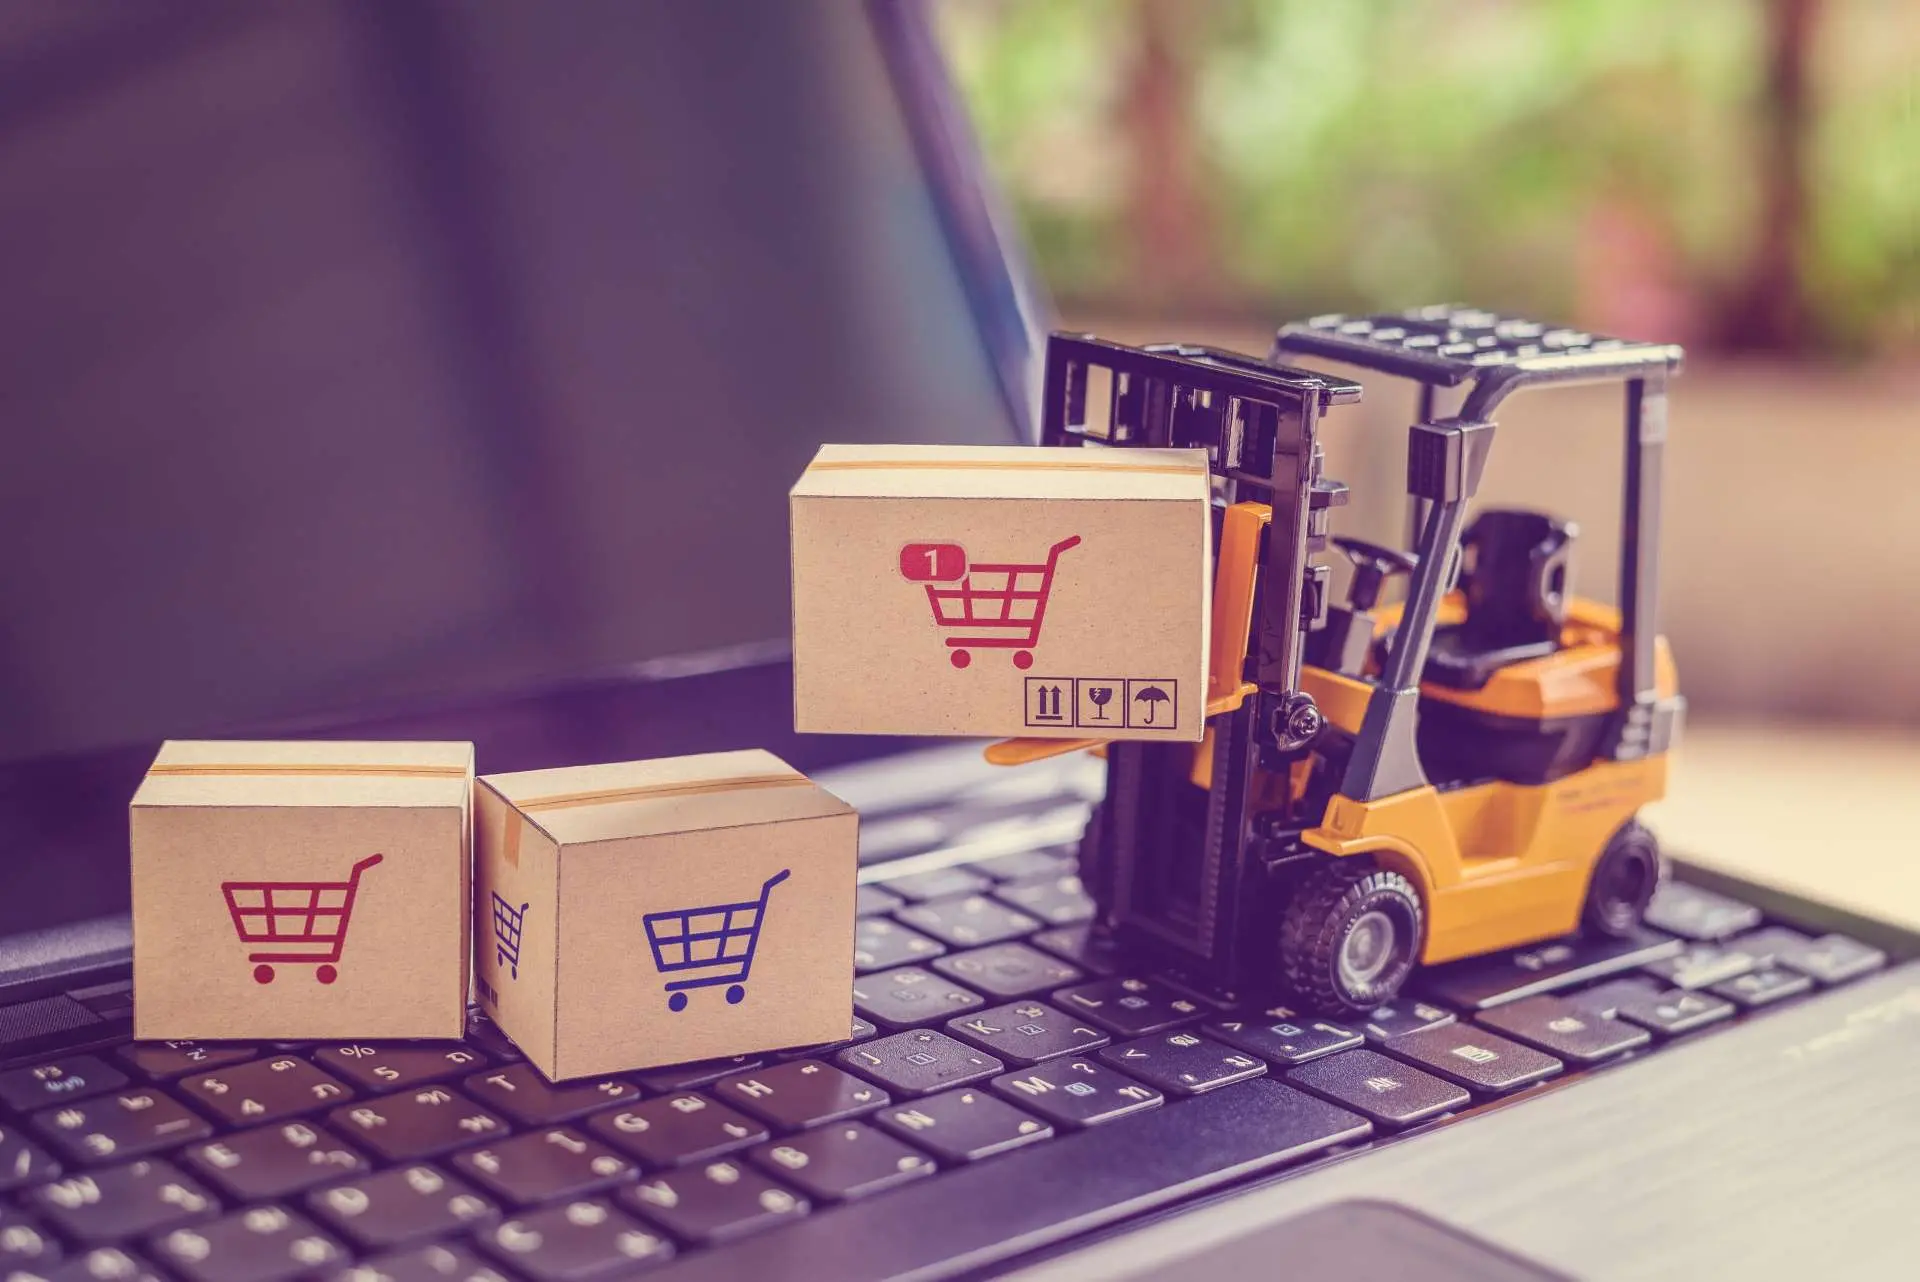 boxes with shopping cart icon being carried for ecommerce strategy